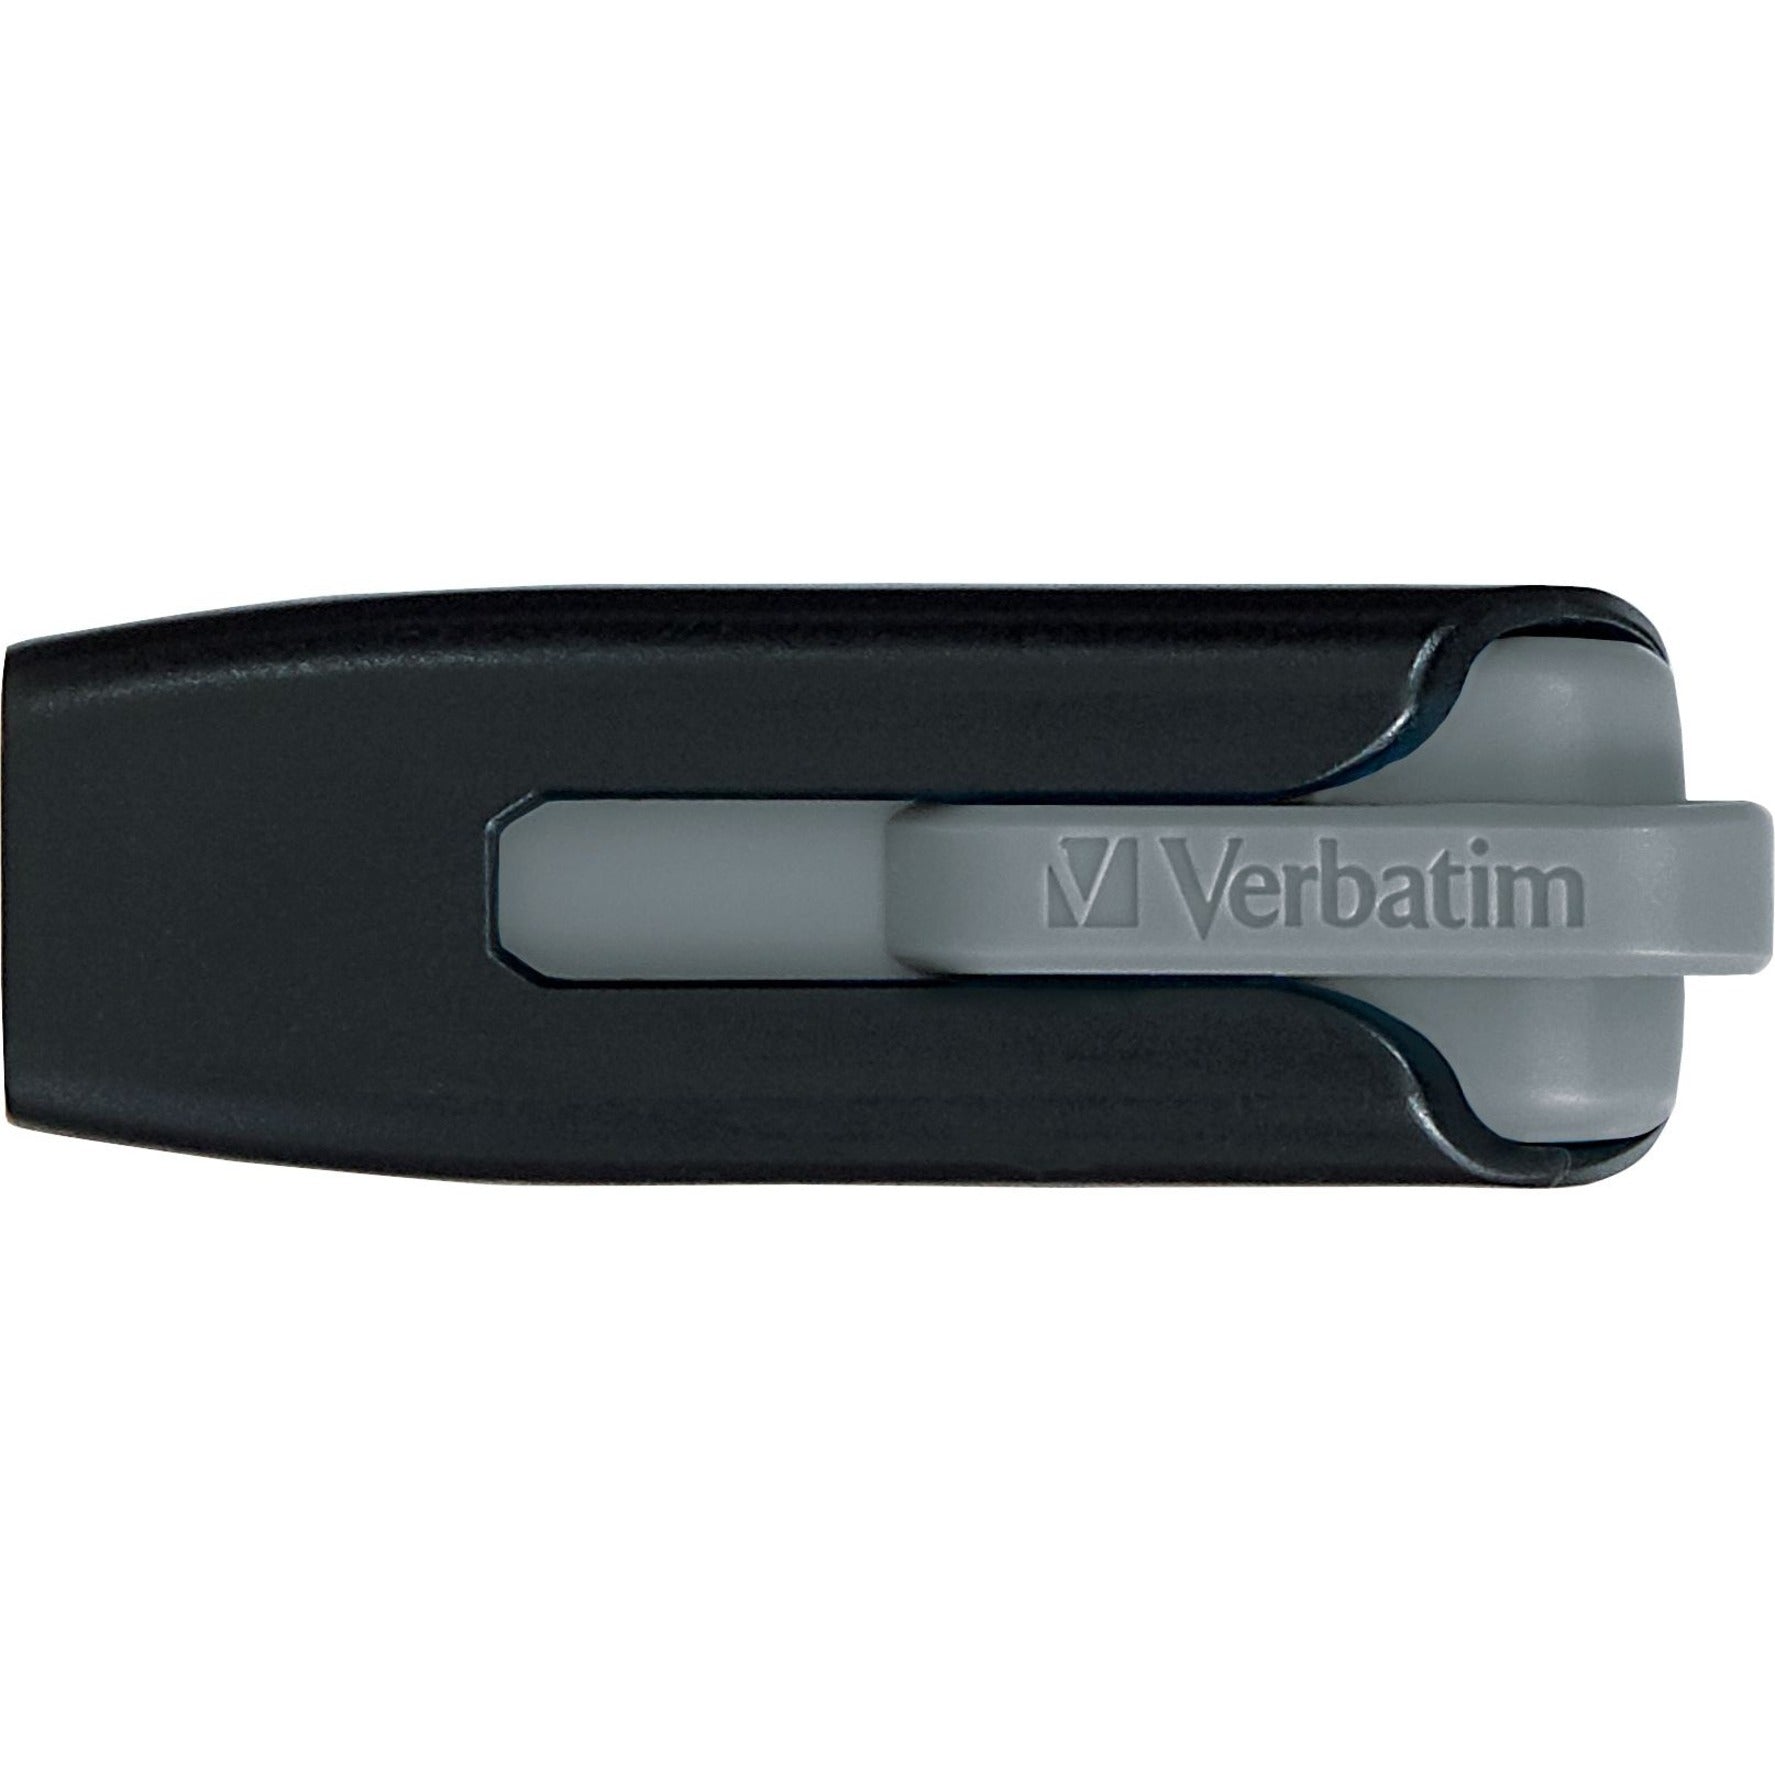 Microban 49171 Store 'n' Go V3 USB 3.0 Drive - 8GB Gray, Password Protection, Retractable